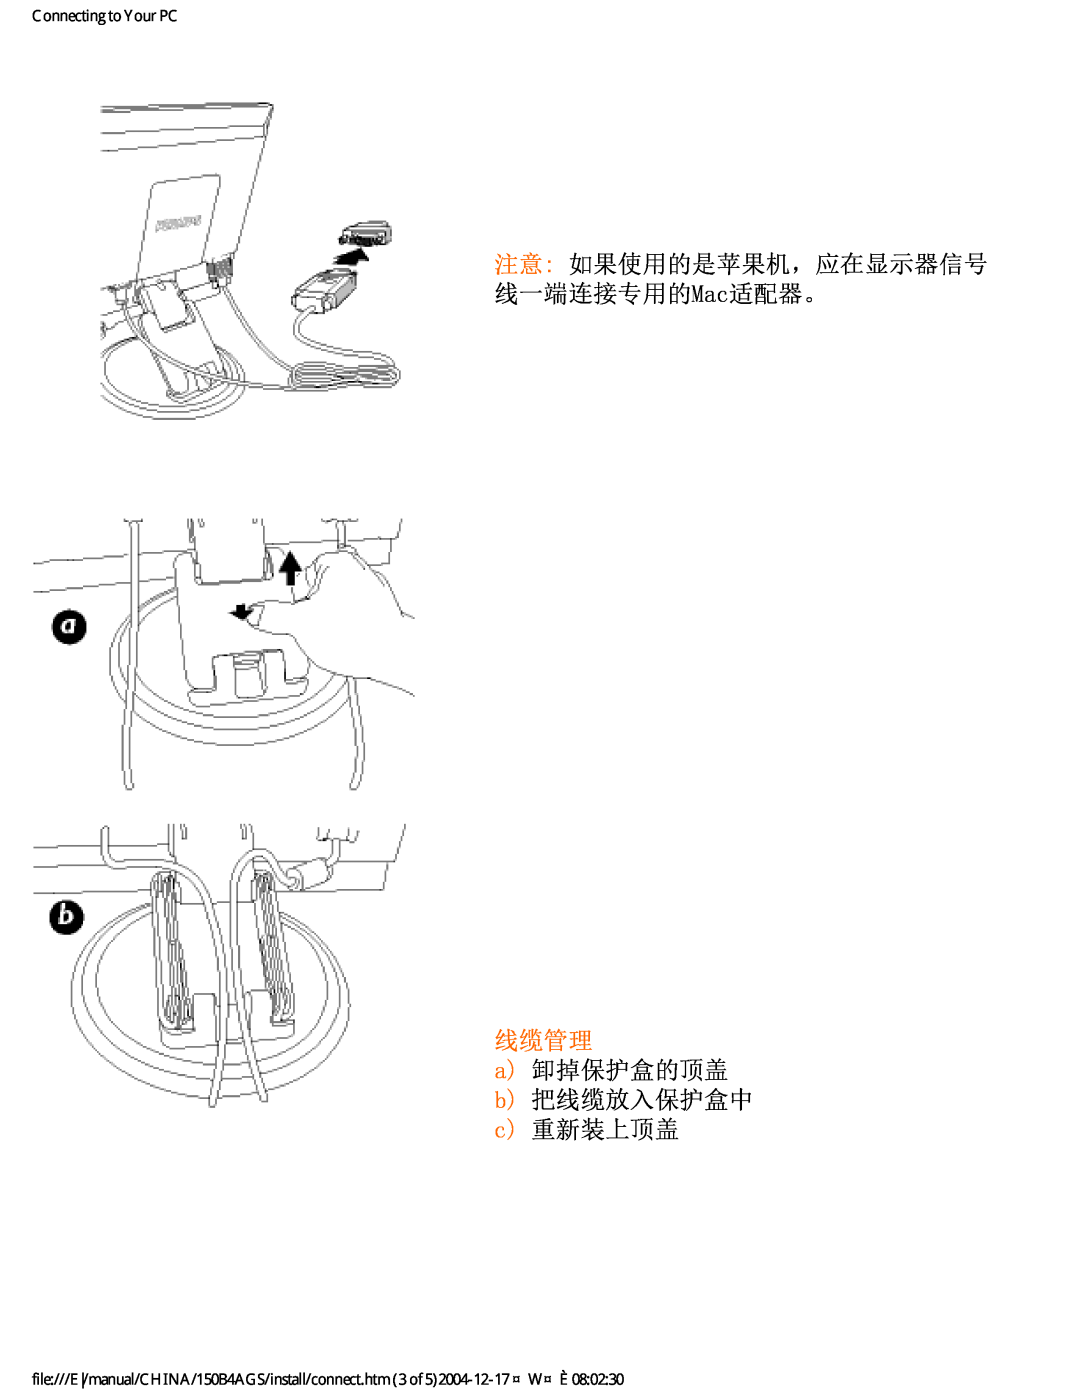 Philips 150B4AS, 150B4AG user manual 线缆管理, a卸掉保护盒的顶盖 b把线缆放入保护盒中 c重新装上顶盖, Connecting to Your PC 